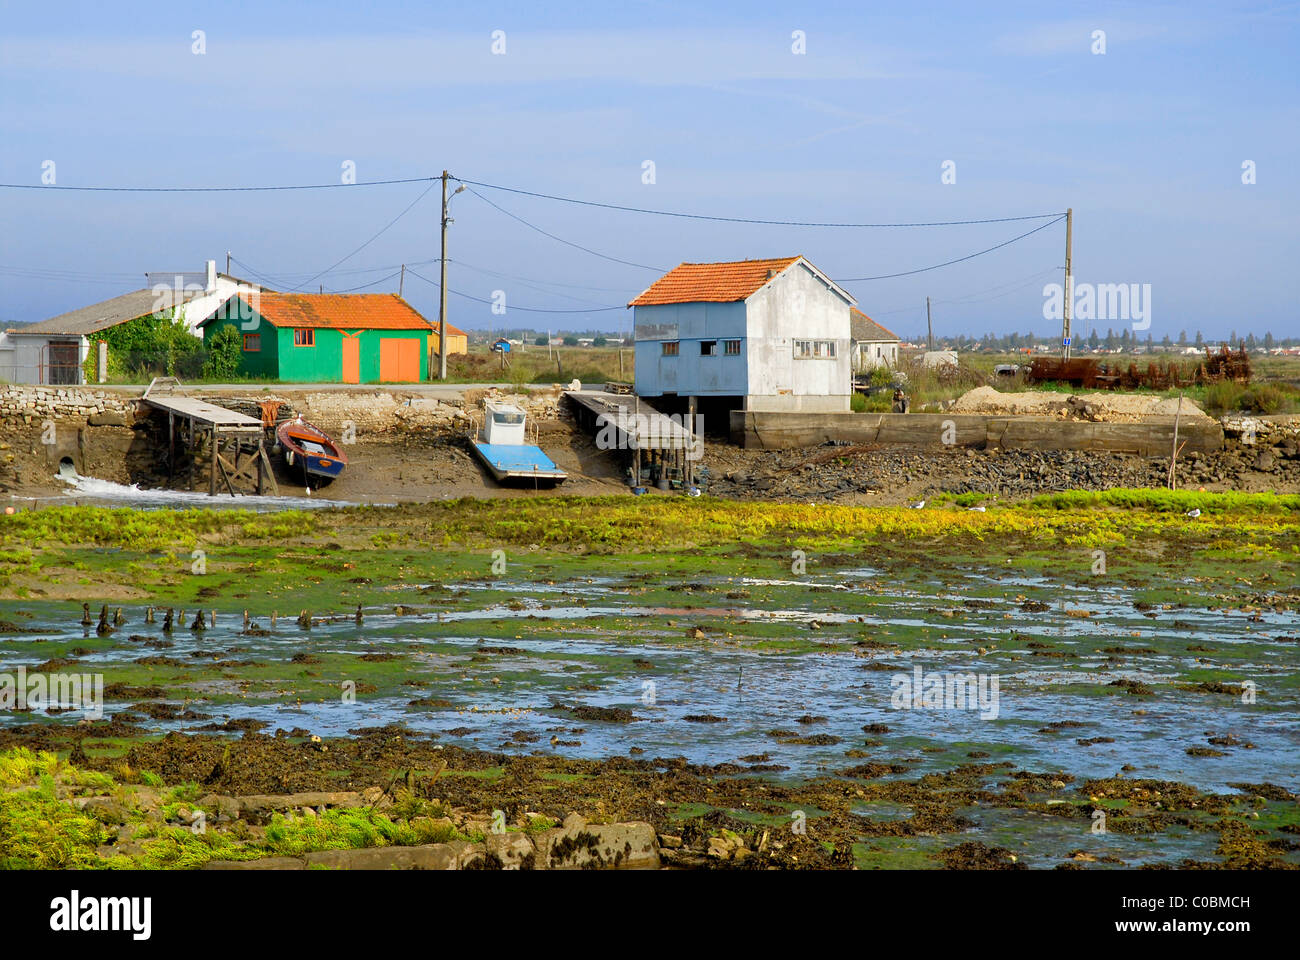 Saint Trojan Oleron in France, region oyster, at low tide, with fishermen huts in the background. Department Charente Maritime. Stock Photo